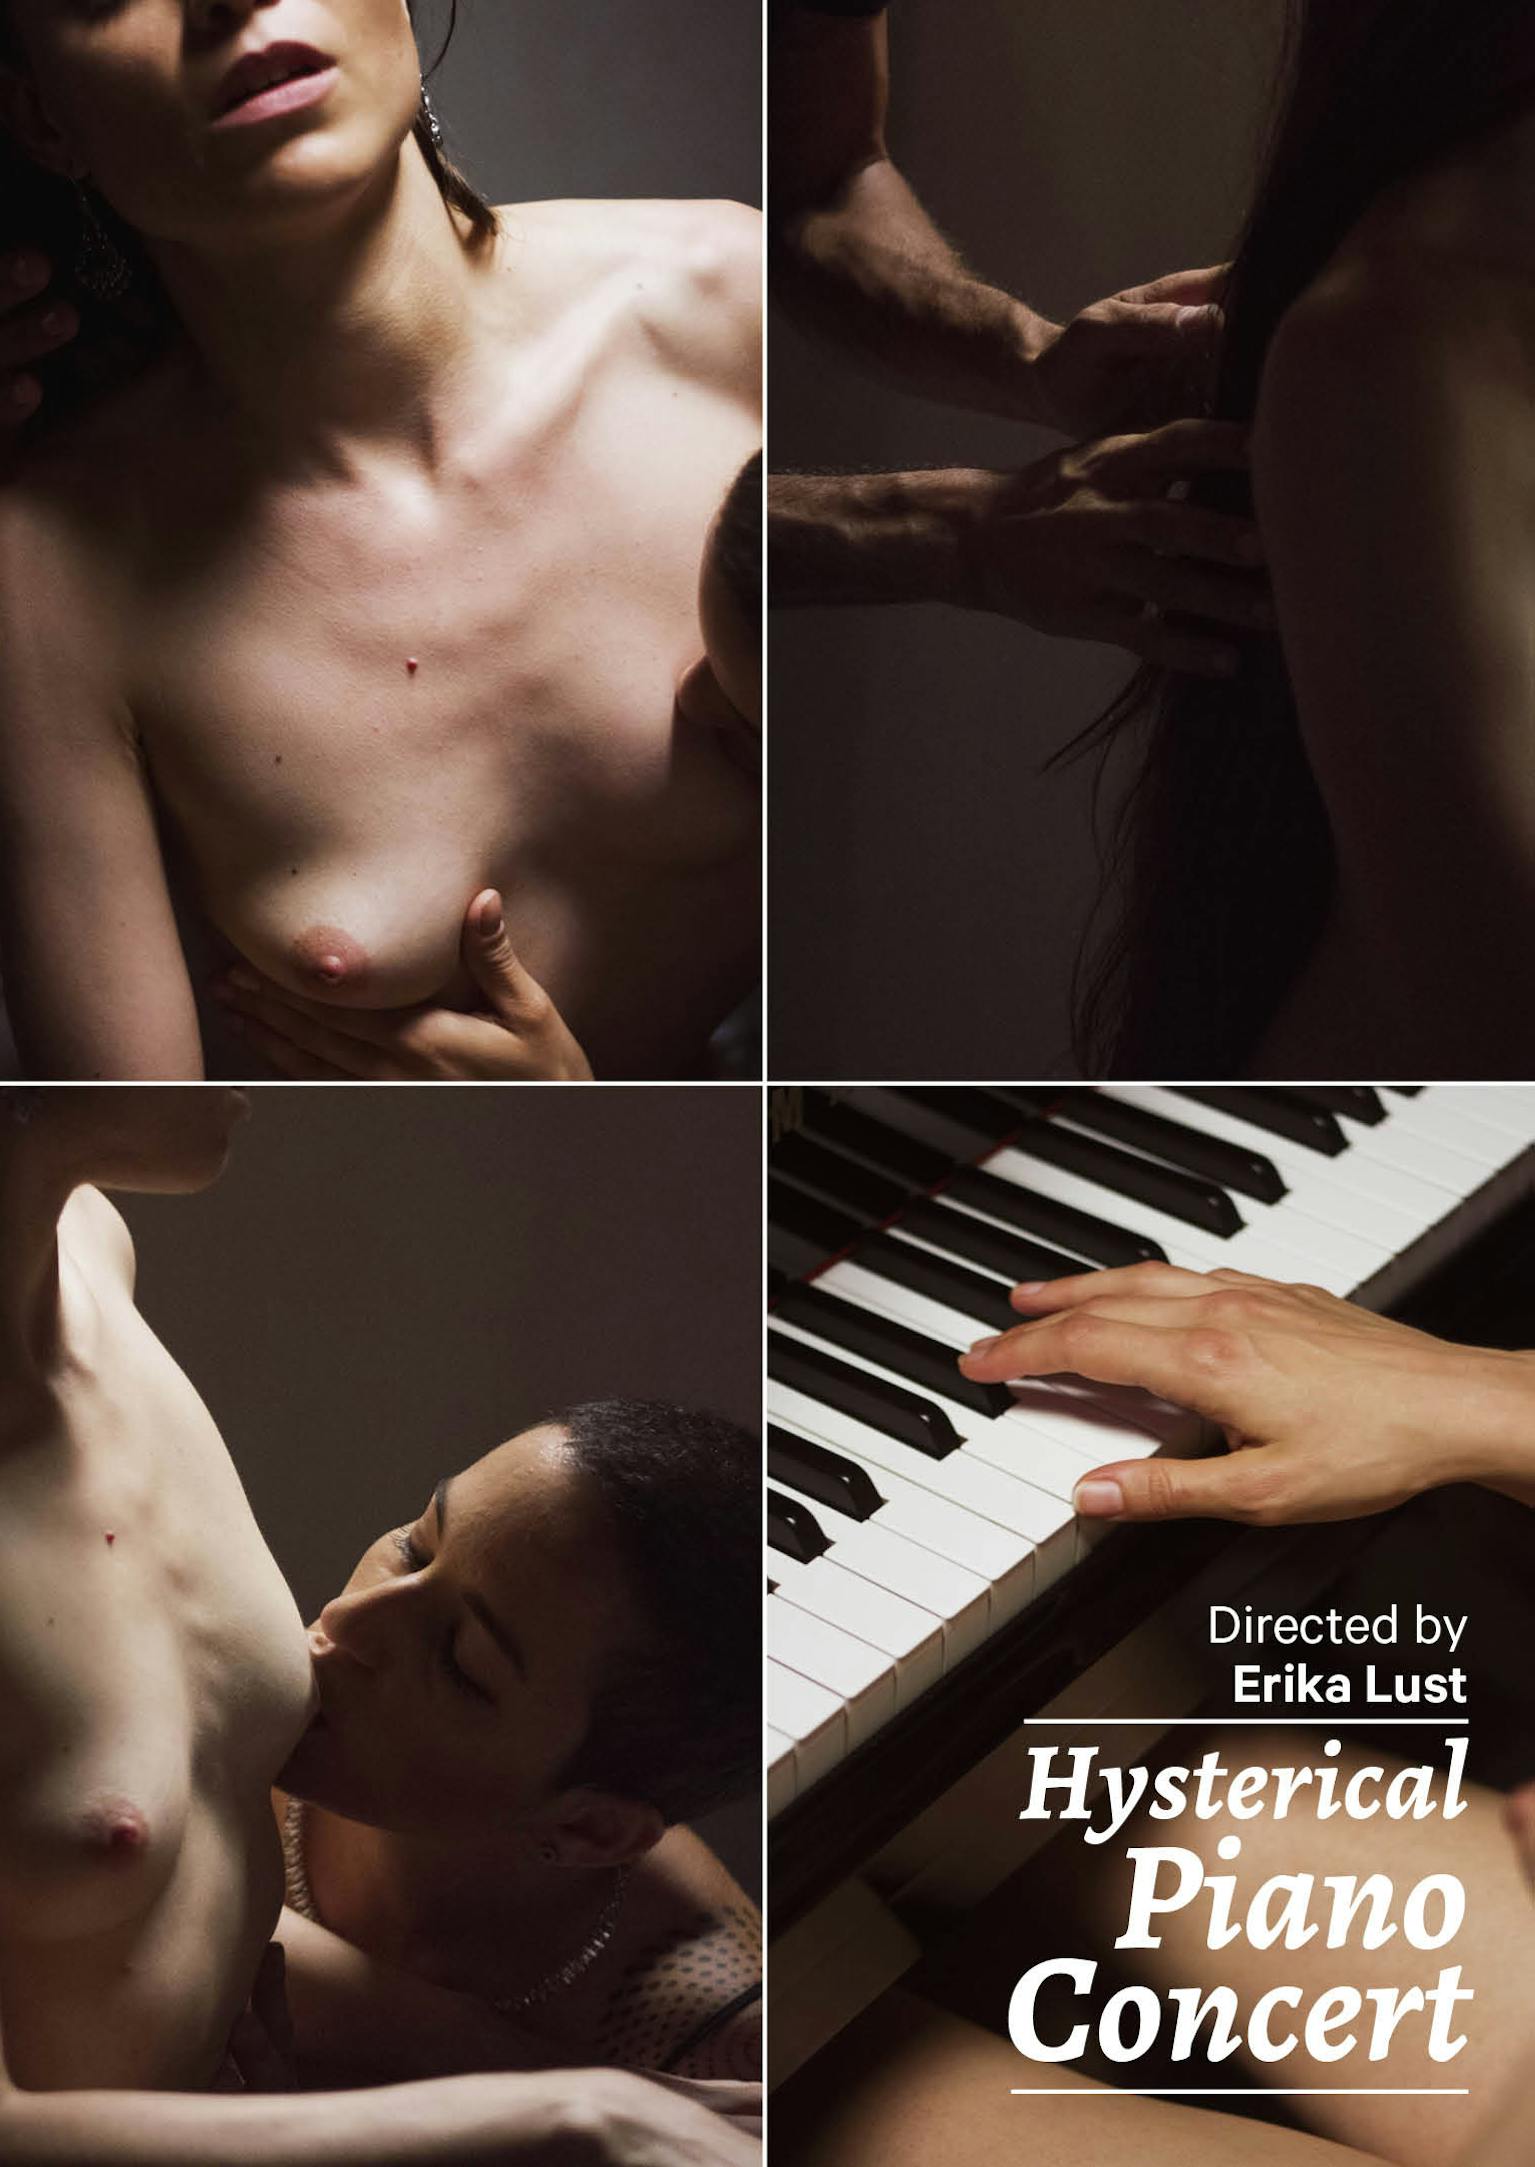 Hysterical Piano Concert